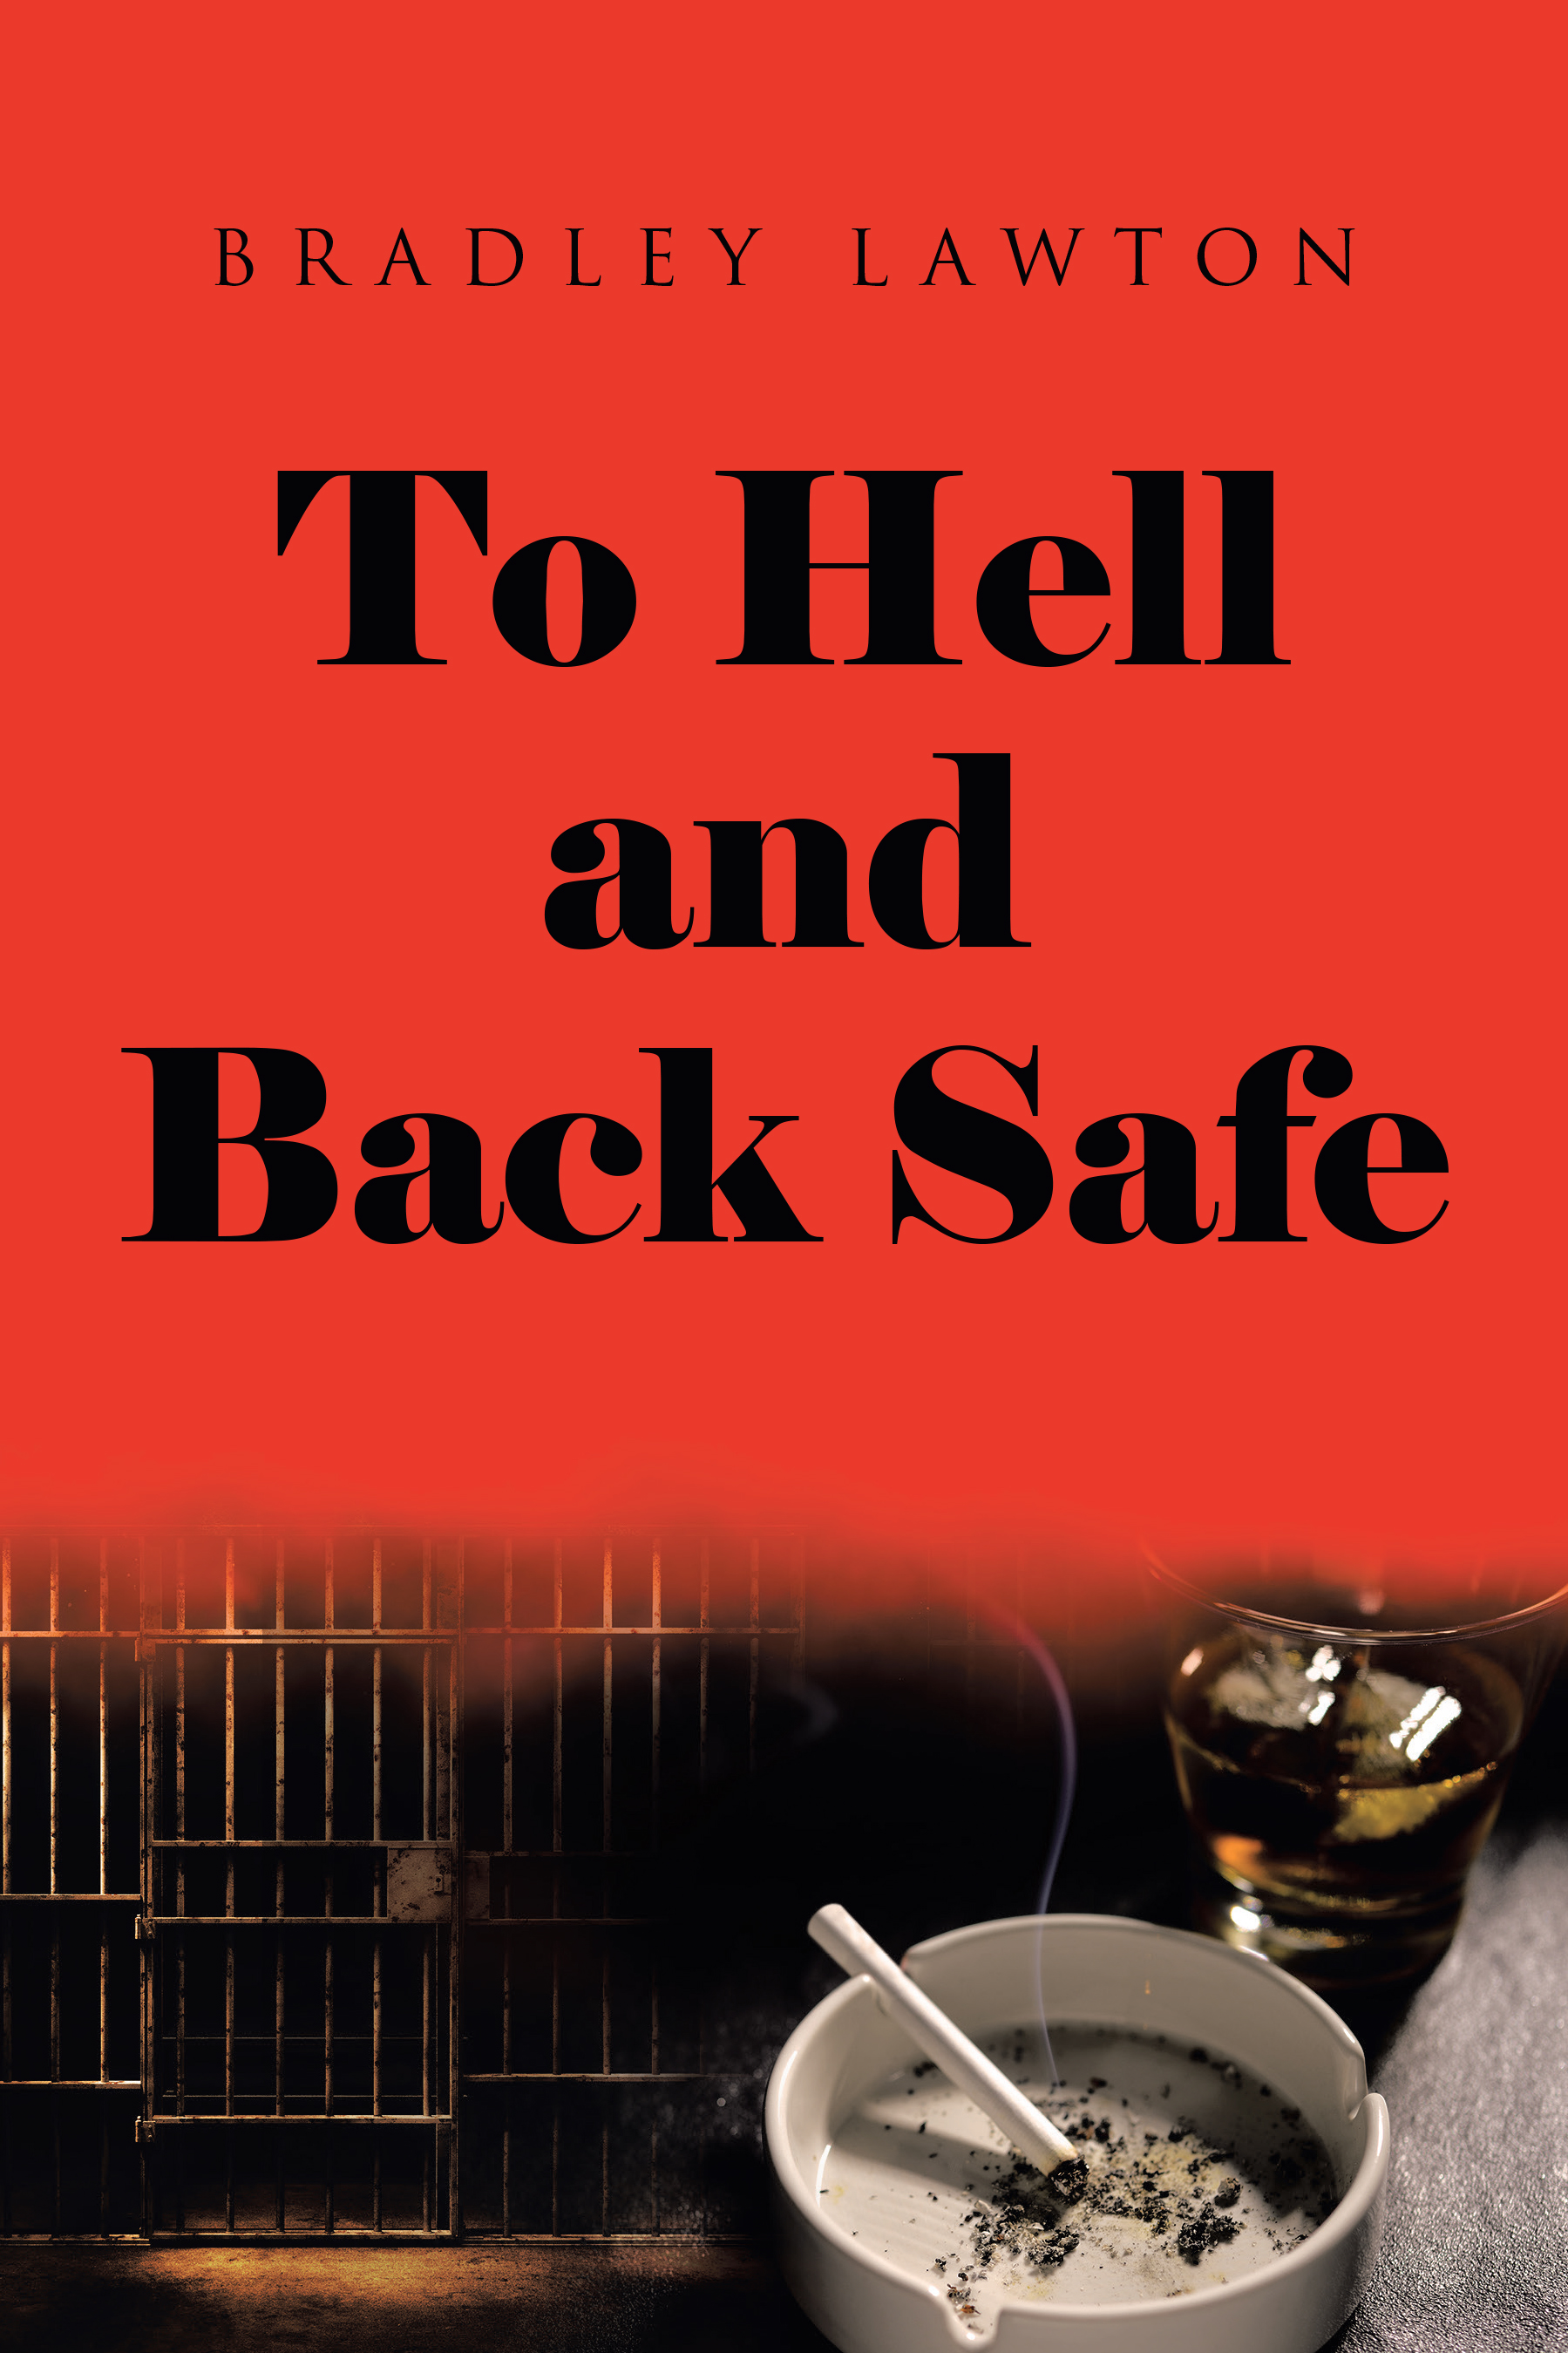 Author Bradley Lawton’s New Book, "To Hell and Back Safe," is a Stirring Memoir Detailing the Author's Journey from the Depths of Addiction to Success and Sobriety